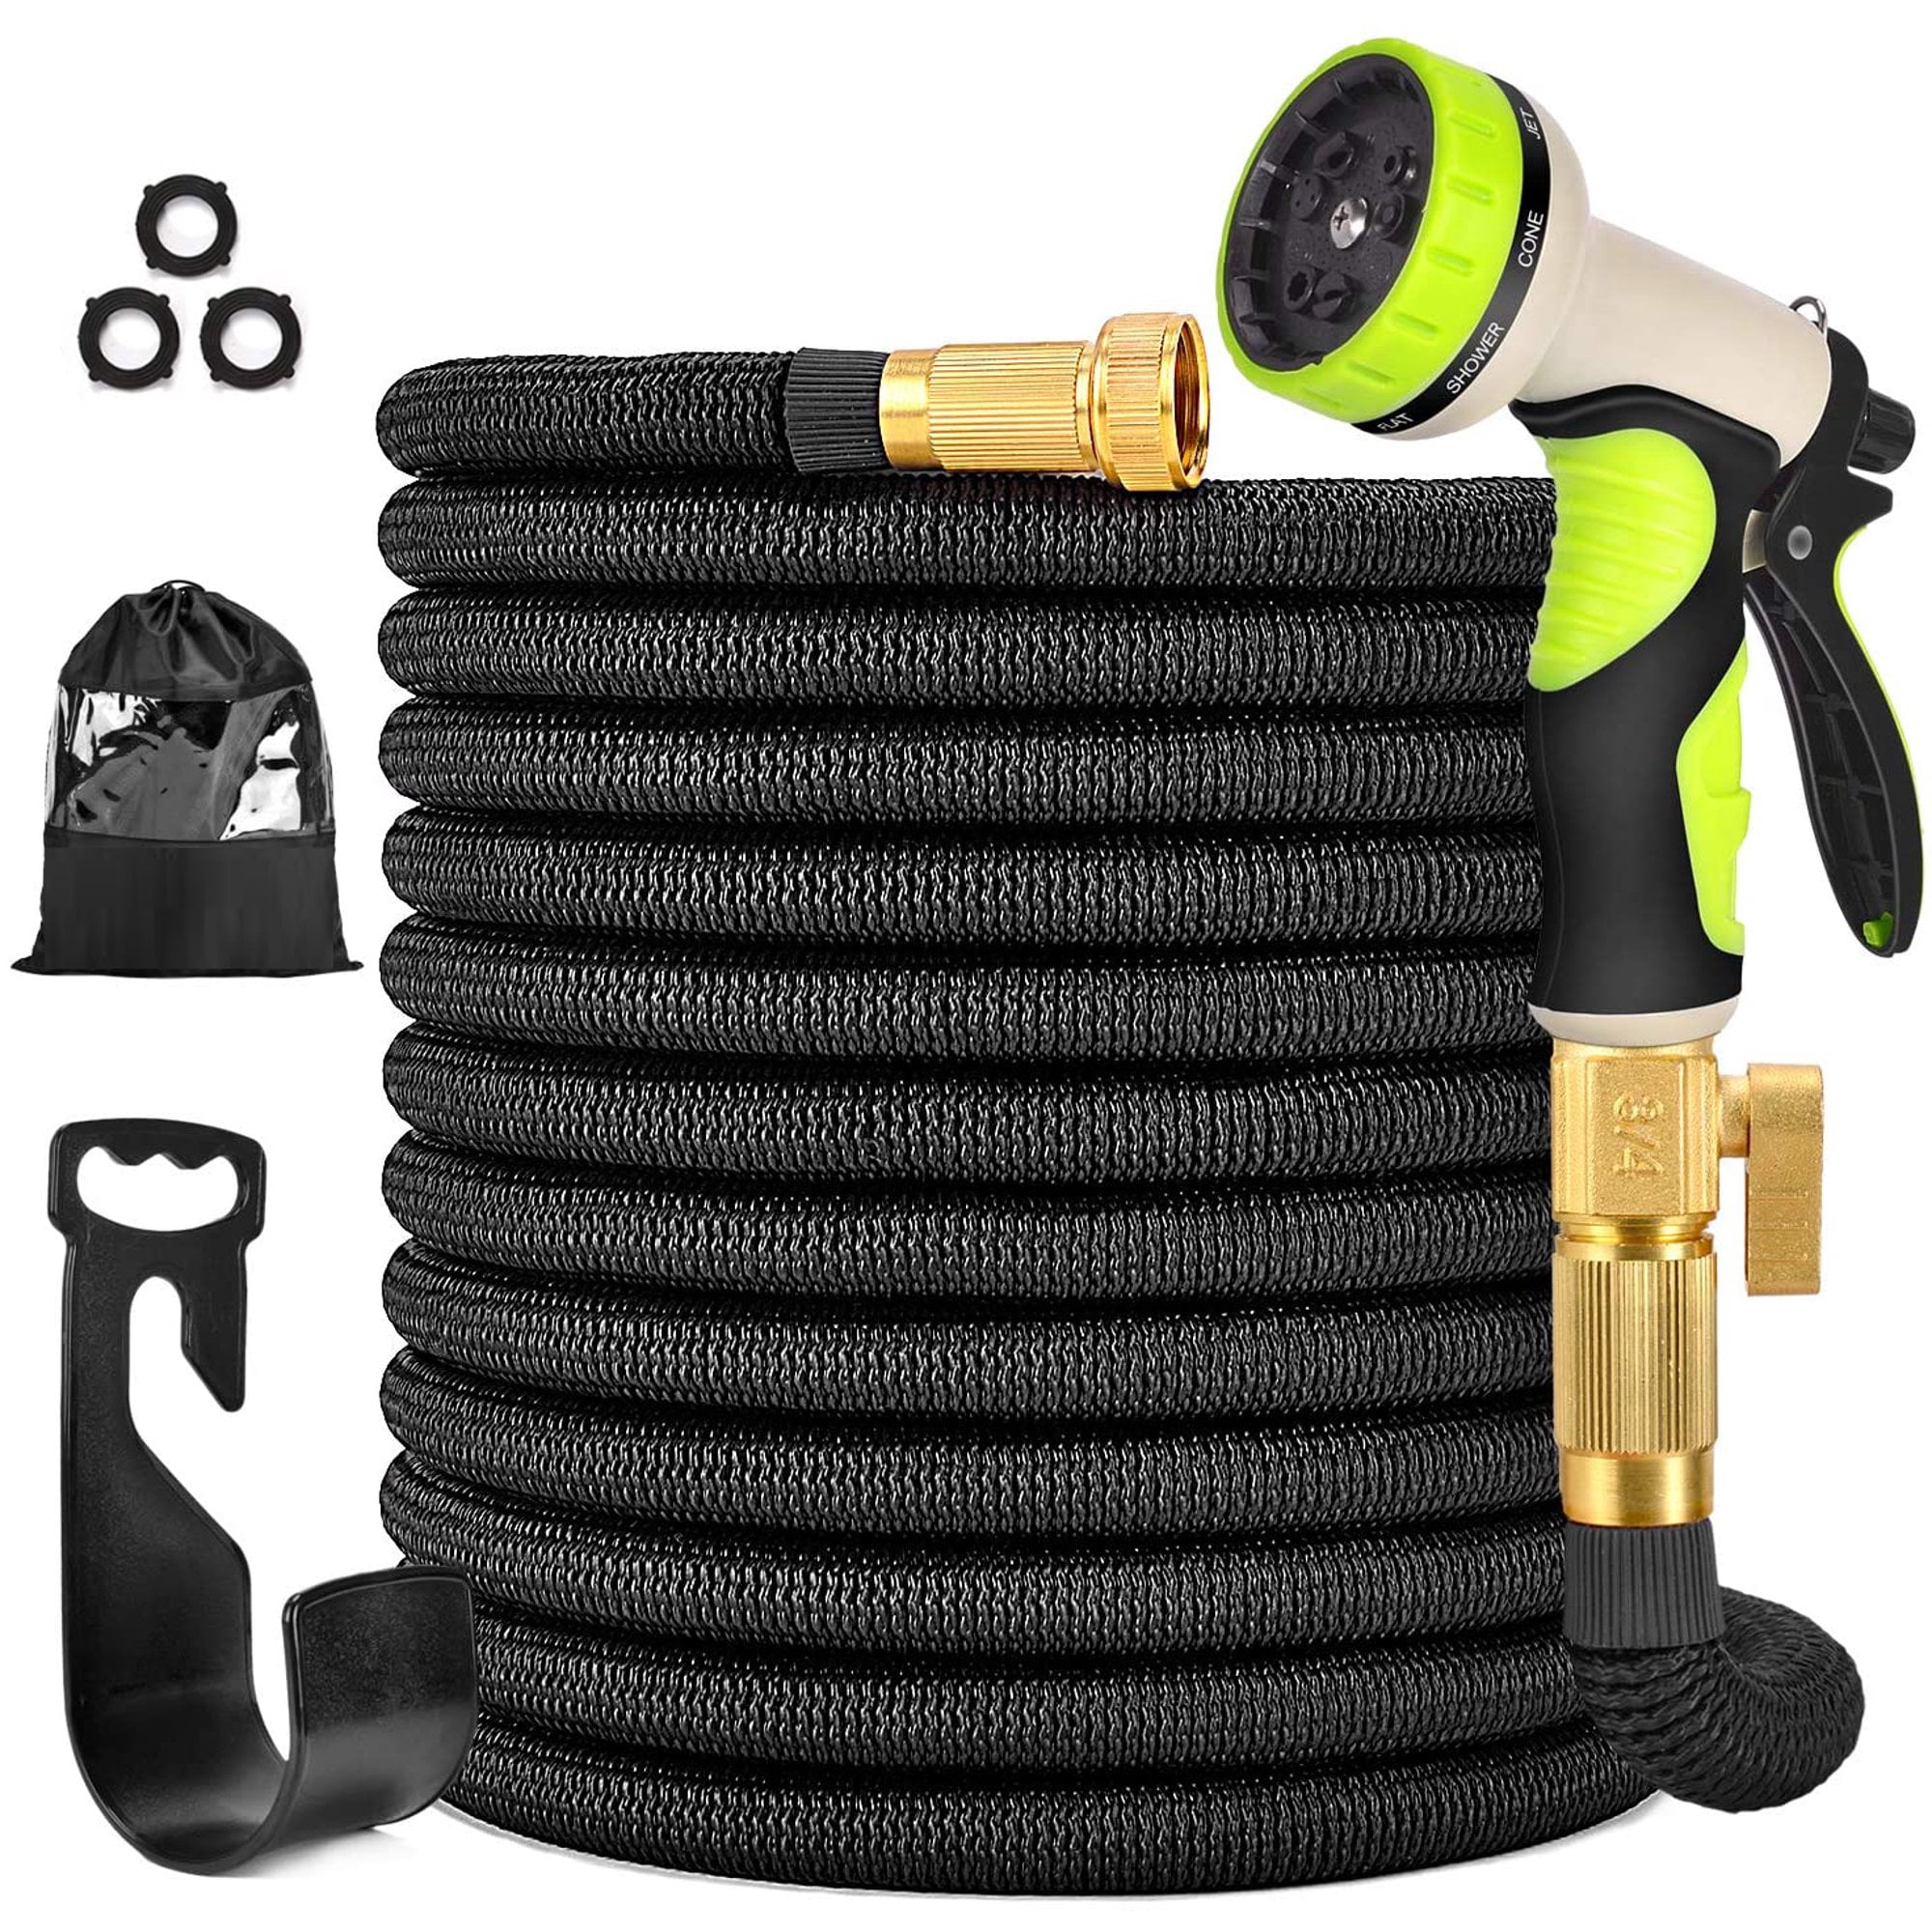 100FT Garden Hose Water Hose, Best Choice for Watering and Washing